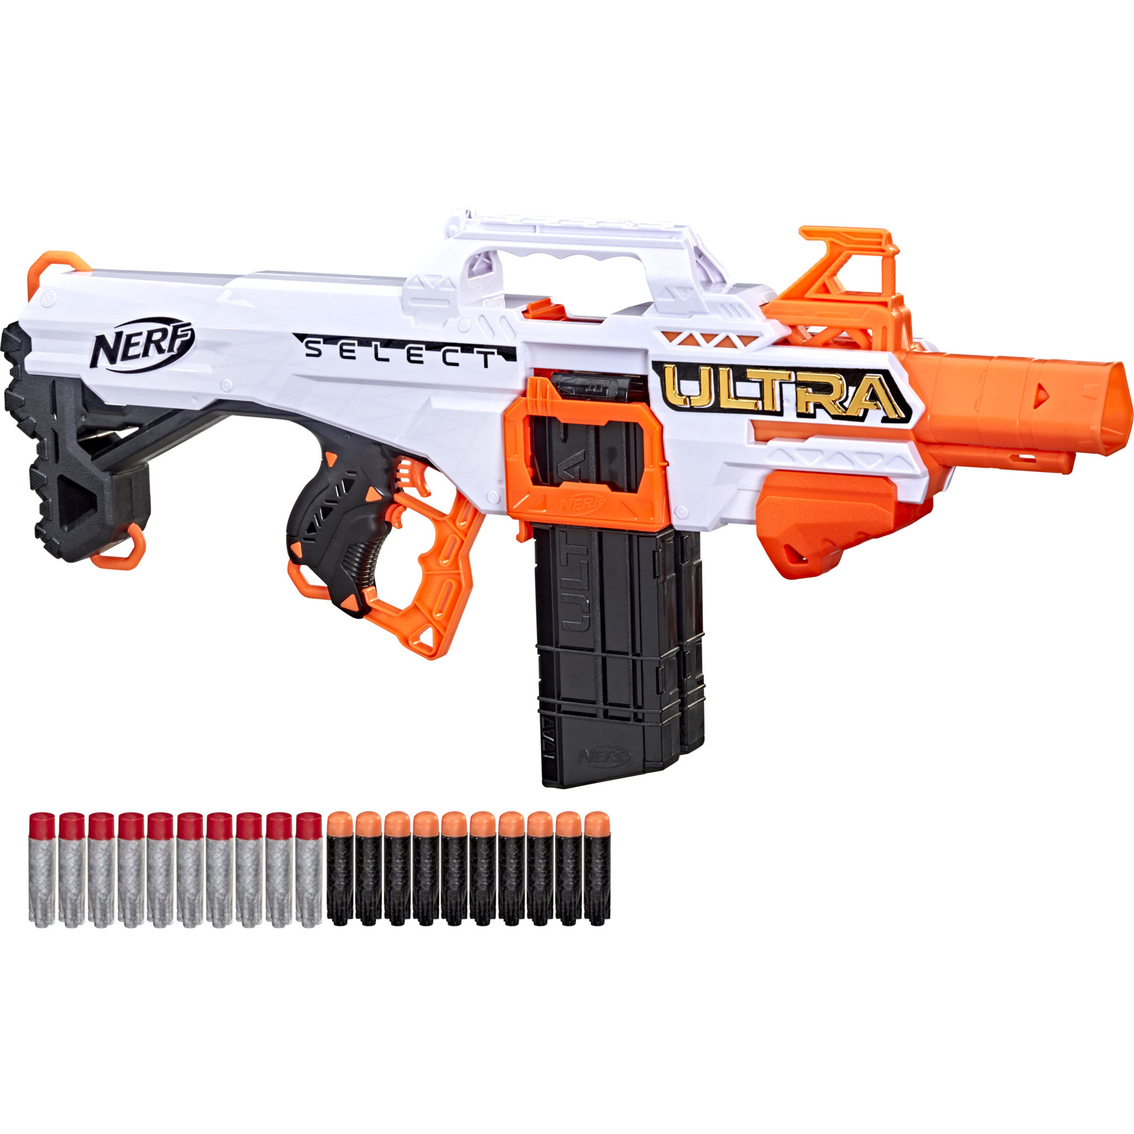 Nerf Ultra Select Blaster Toy - Image 2 of 2